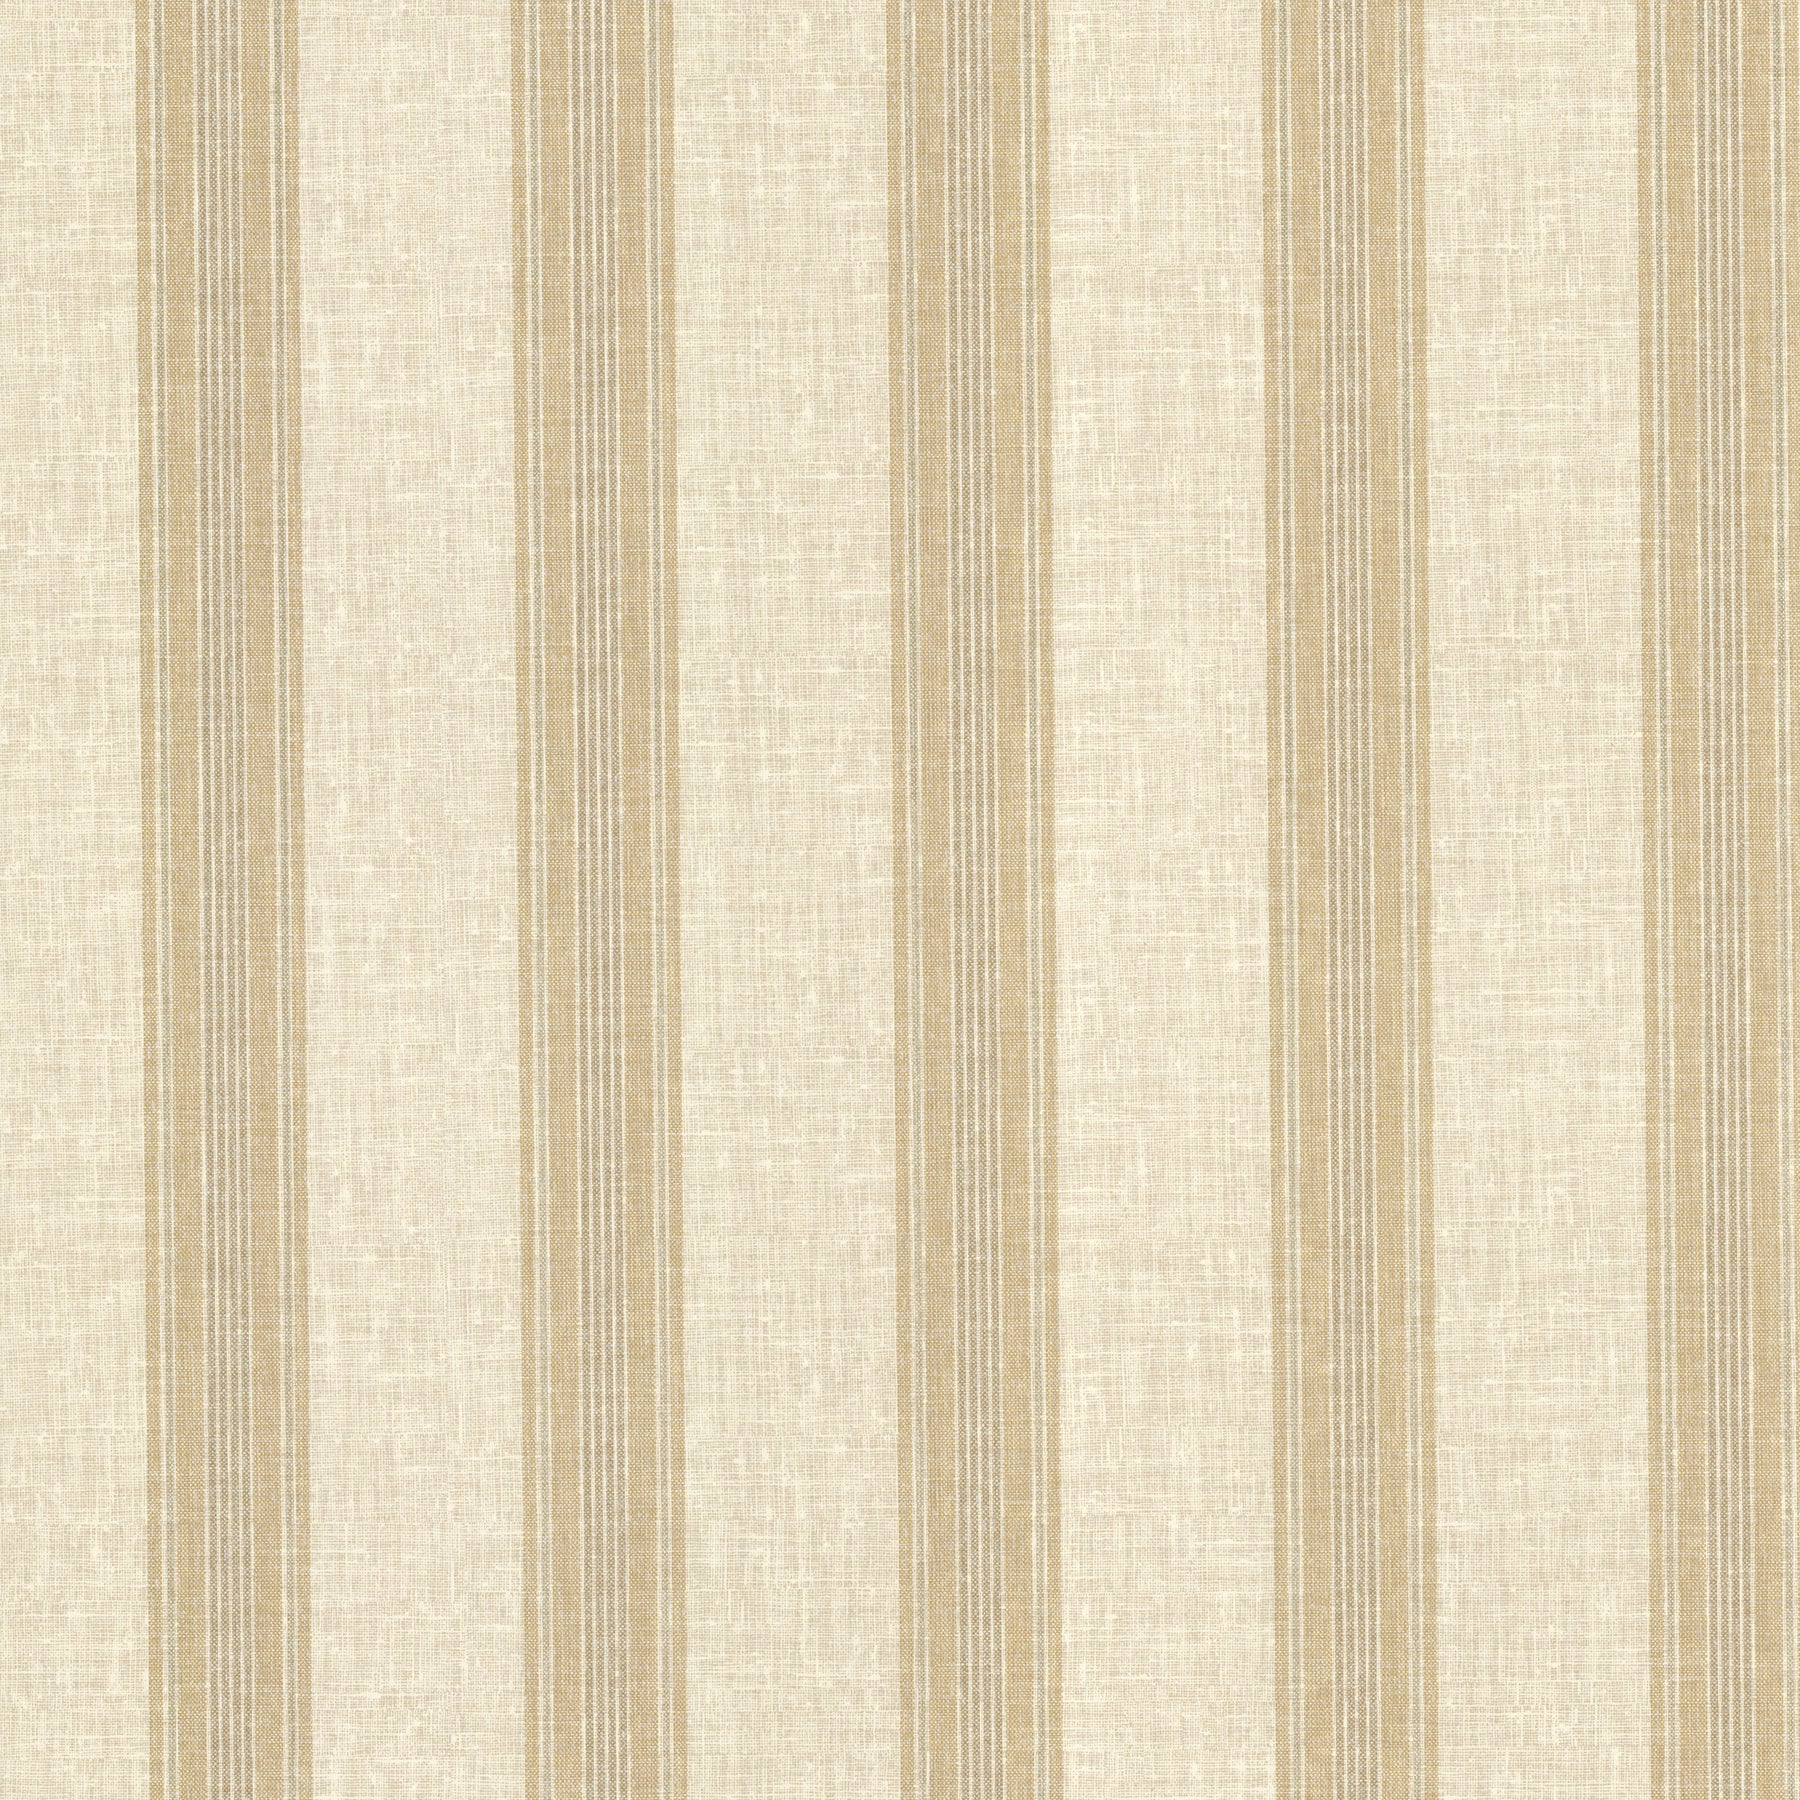 View 2718-66836 Texture Trends II Lineage Brewster Wallpaper